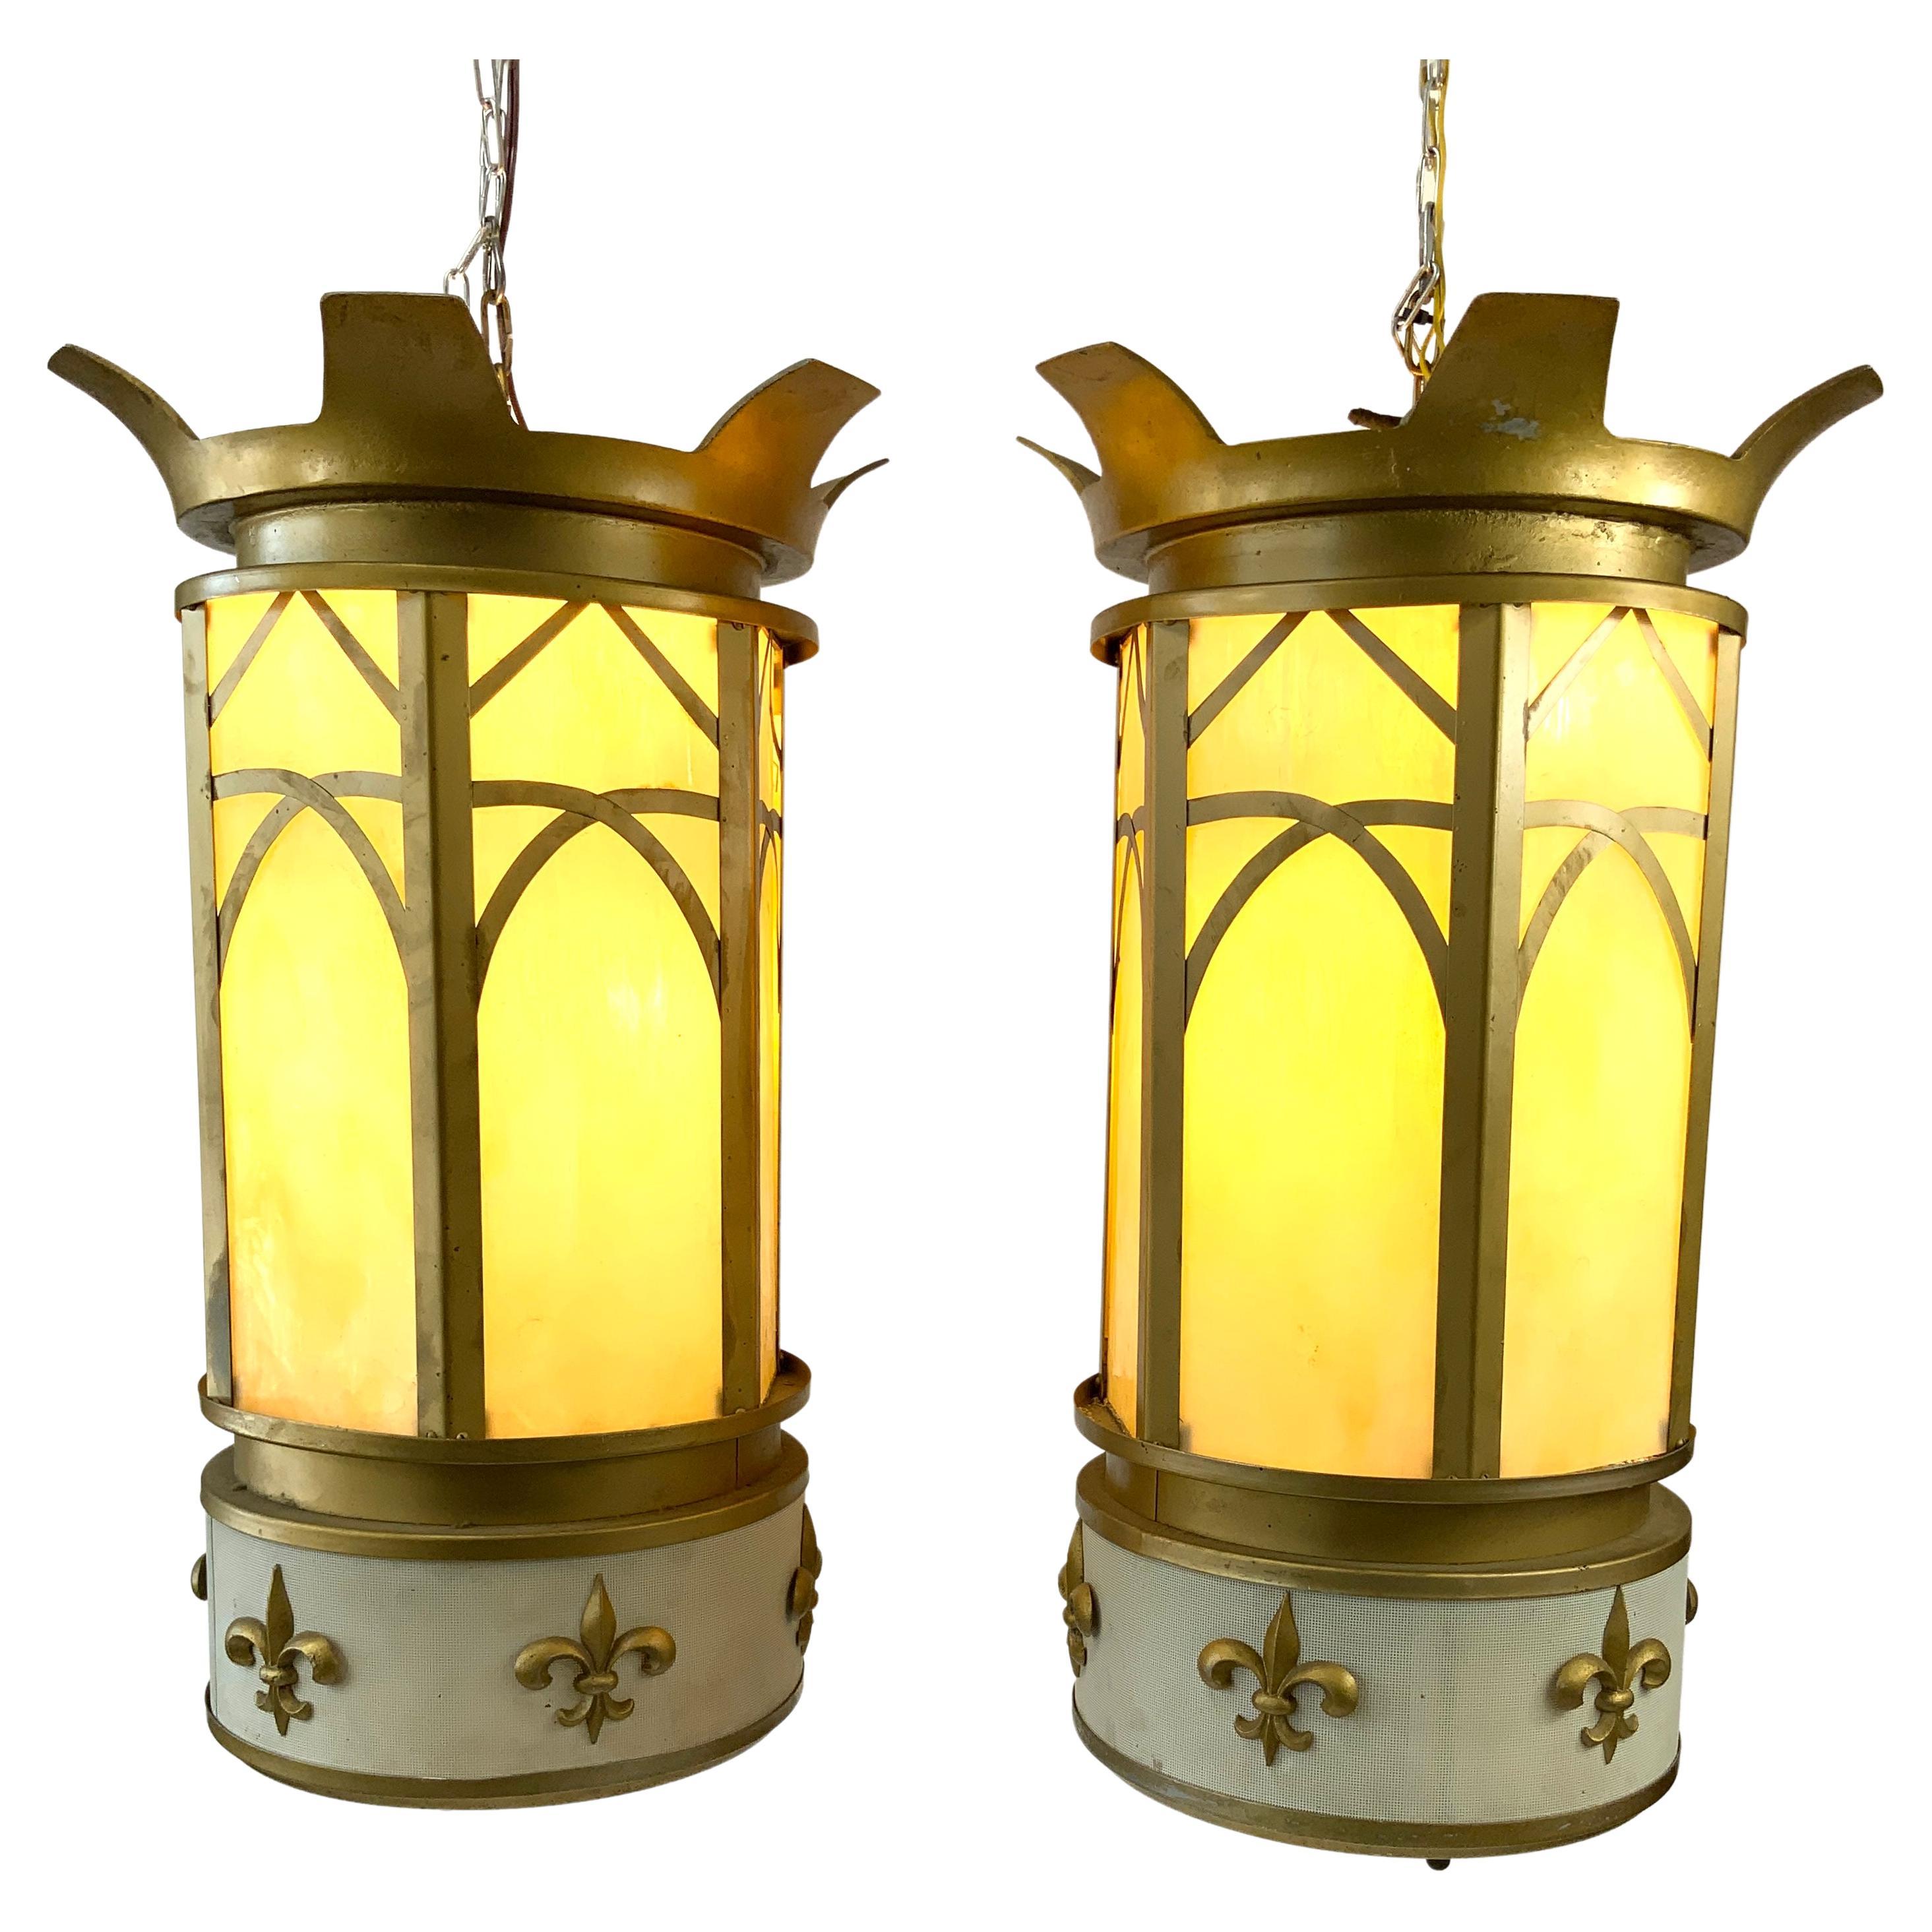 Pair of Art Deco Stained Glass “Fleur De Lys” Cathedral Lantern Lamps For Sale